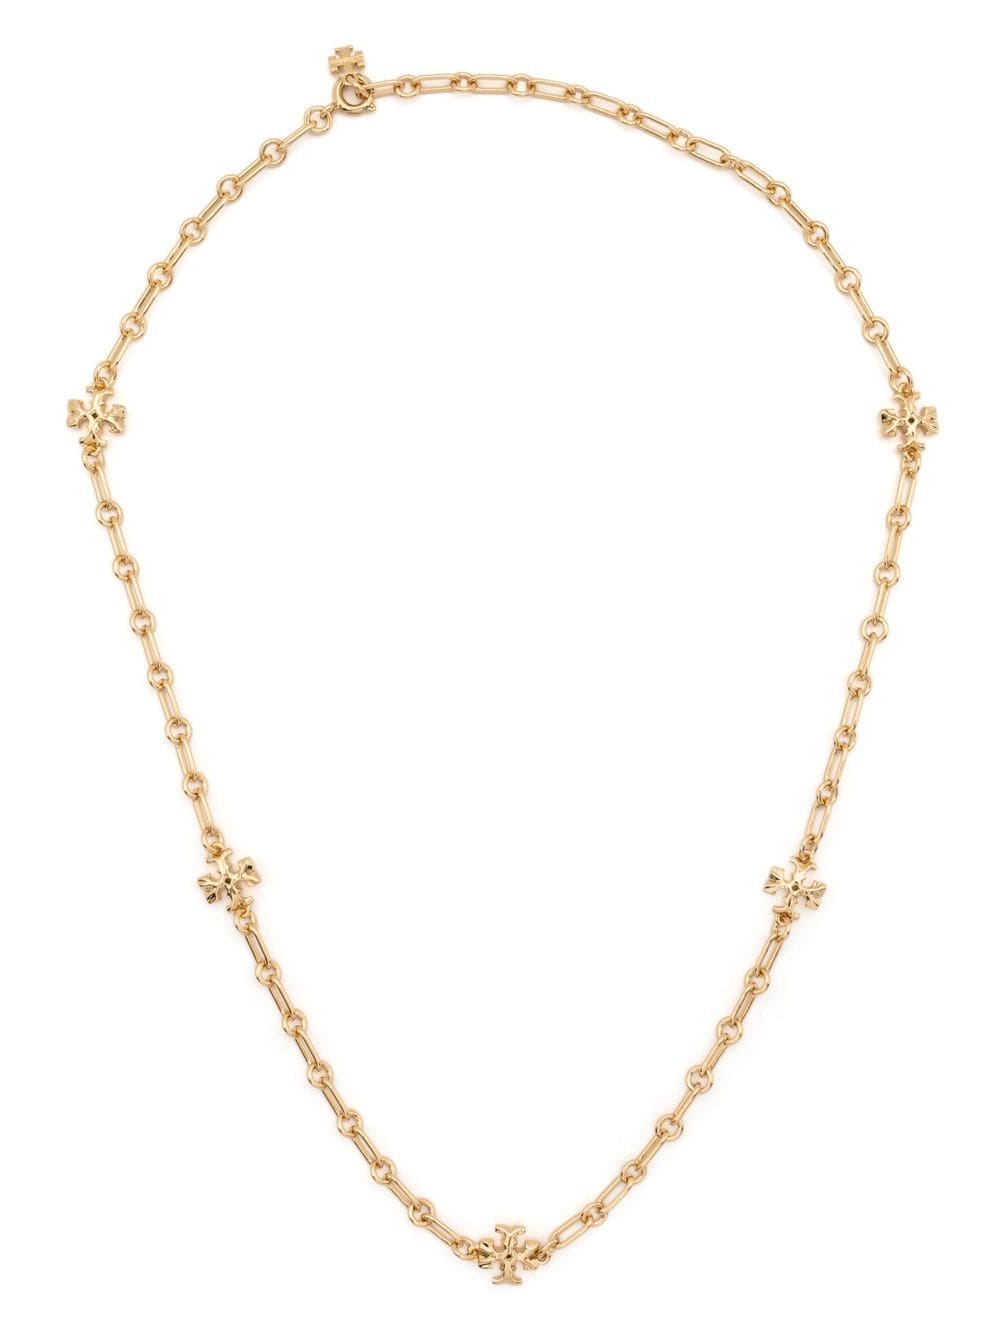 TORY BURCH ROXANNE BEADED NECKLACE